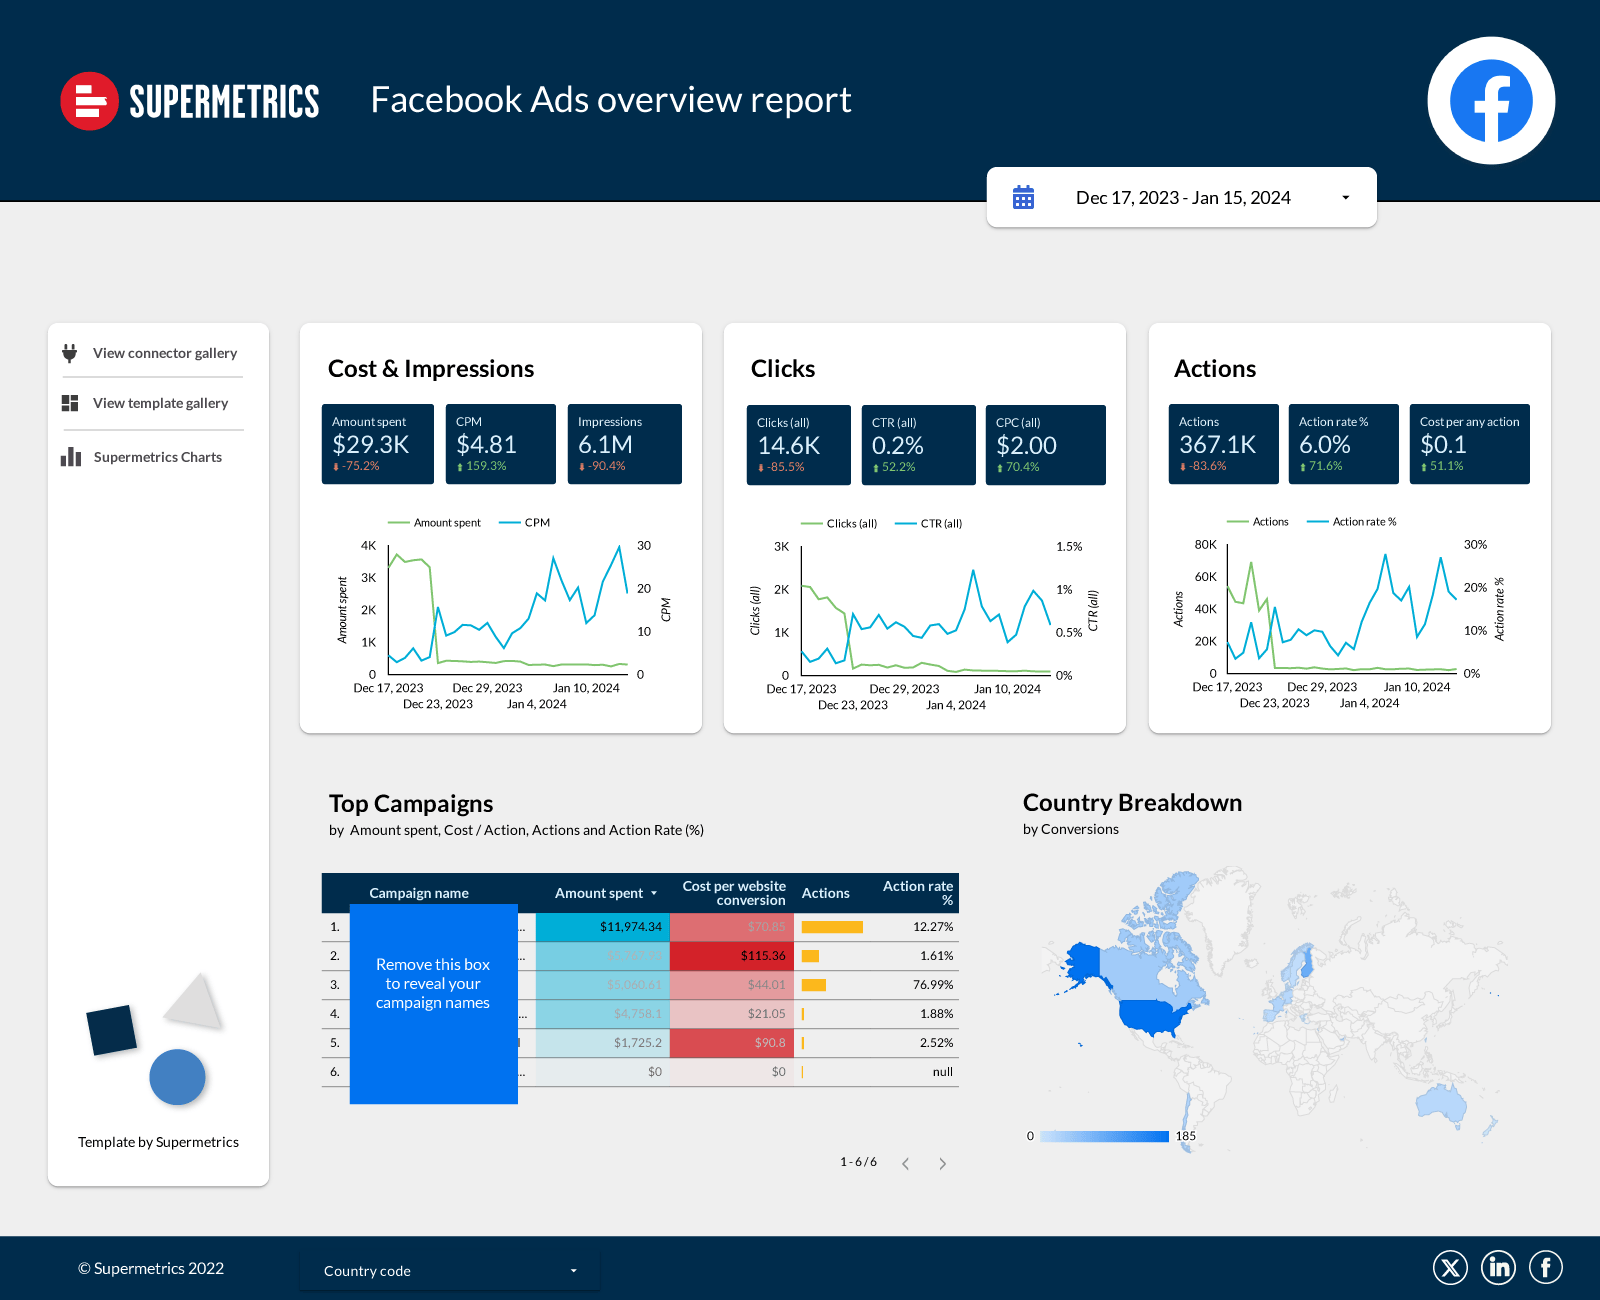 "Facebook Ads overview report" dashboard in Supermetrics